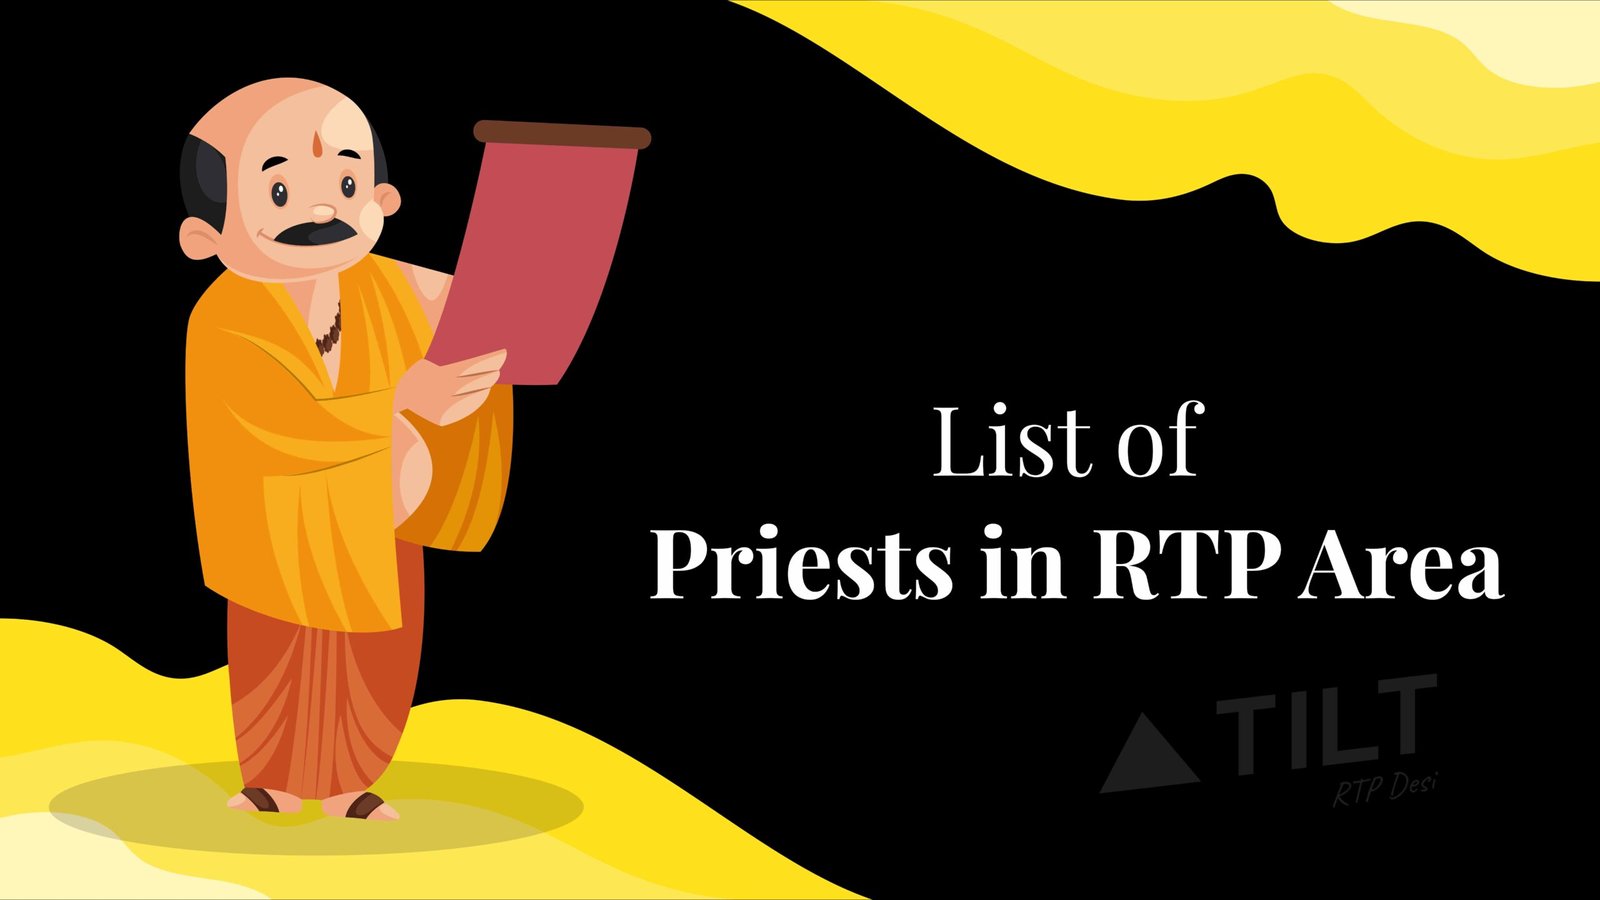 List of priests in RTP area